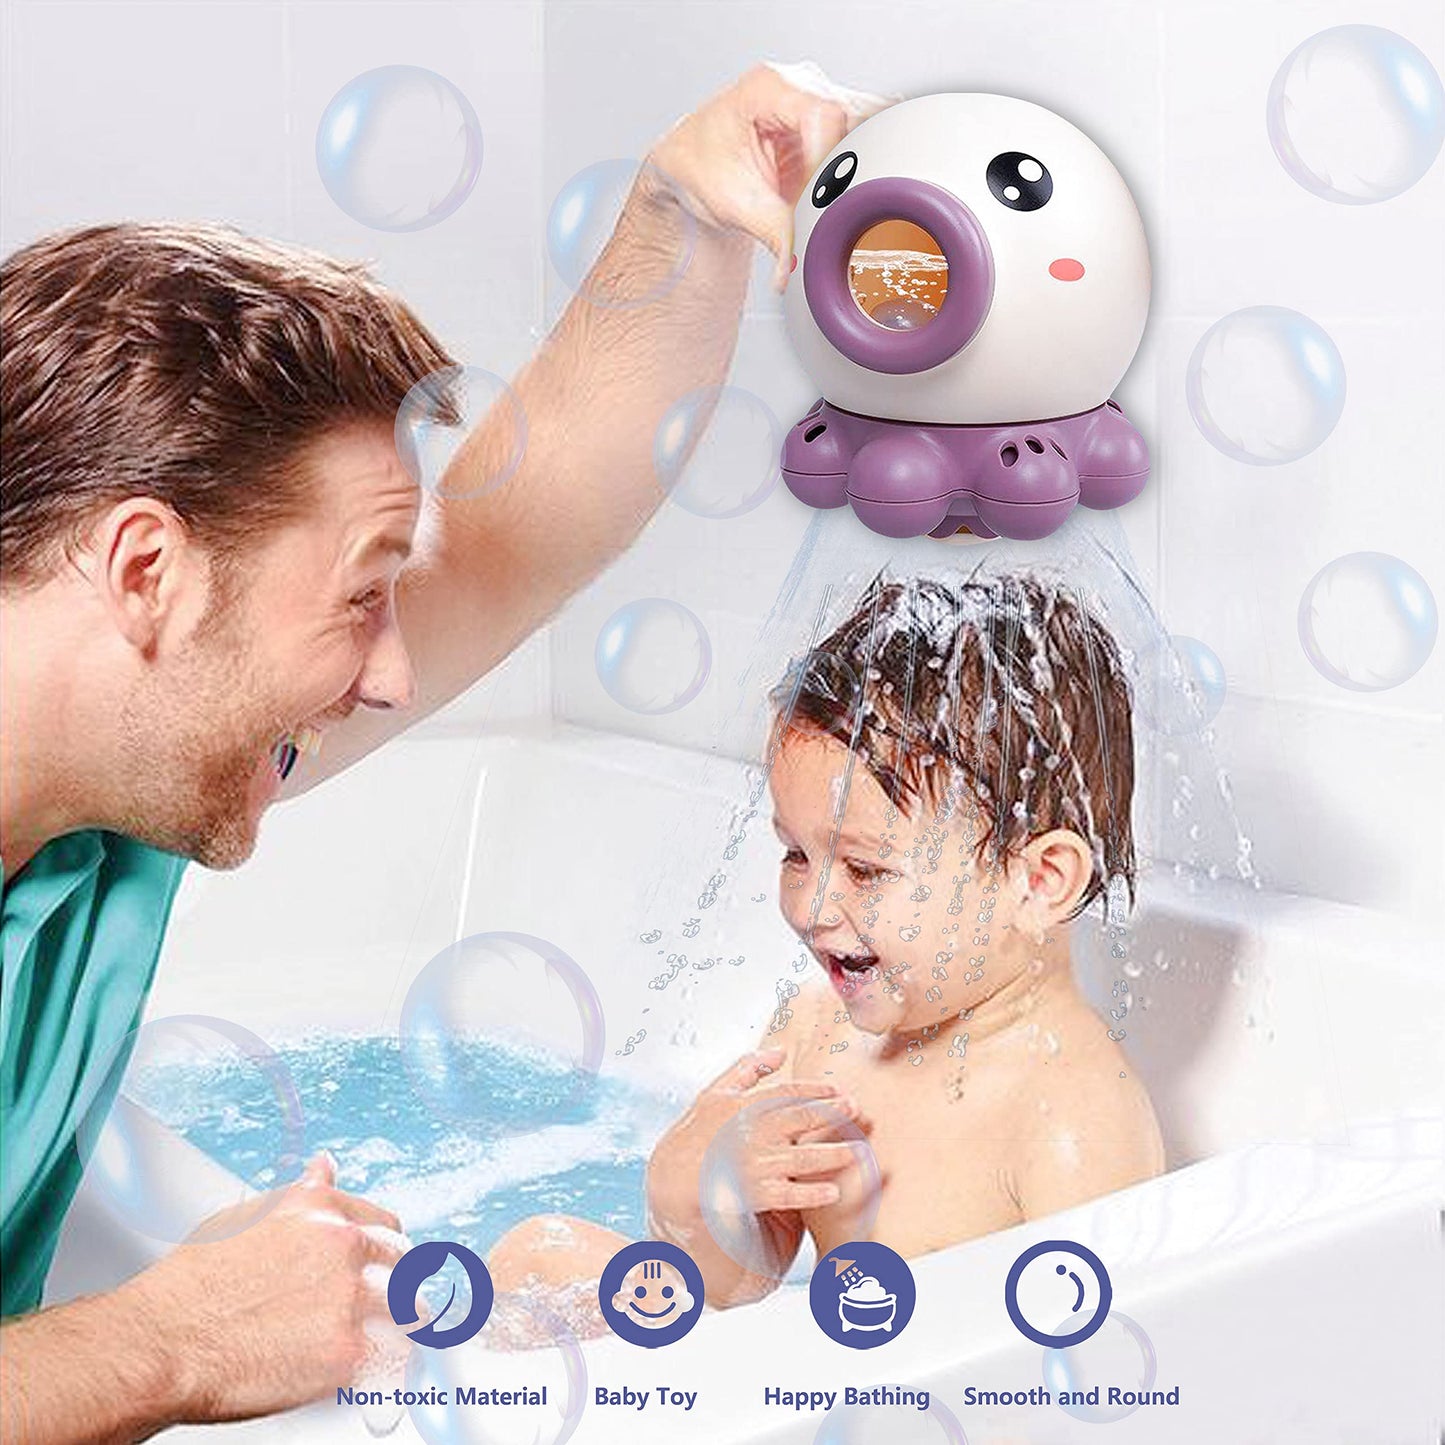 Octopus Water Spray Bath Toy for Kids 0-5 Years Old